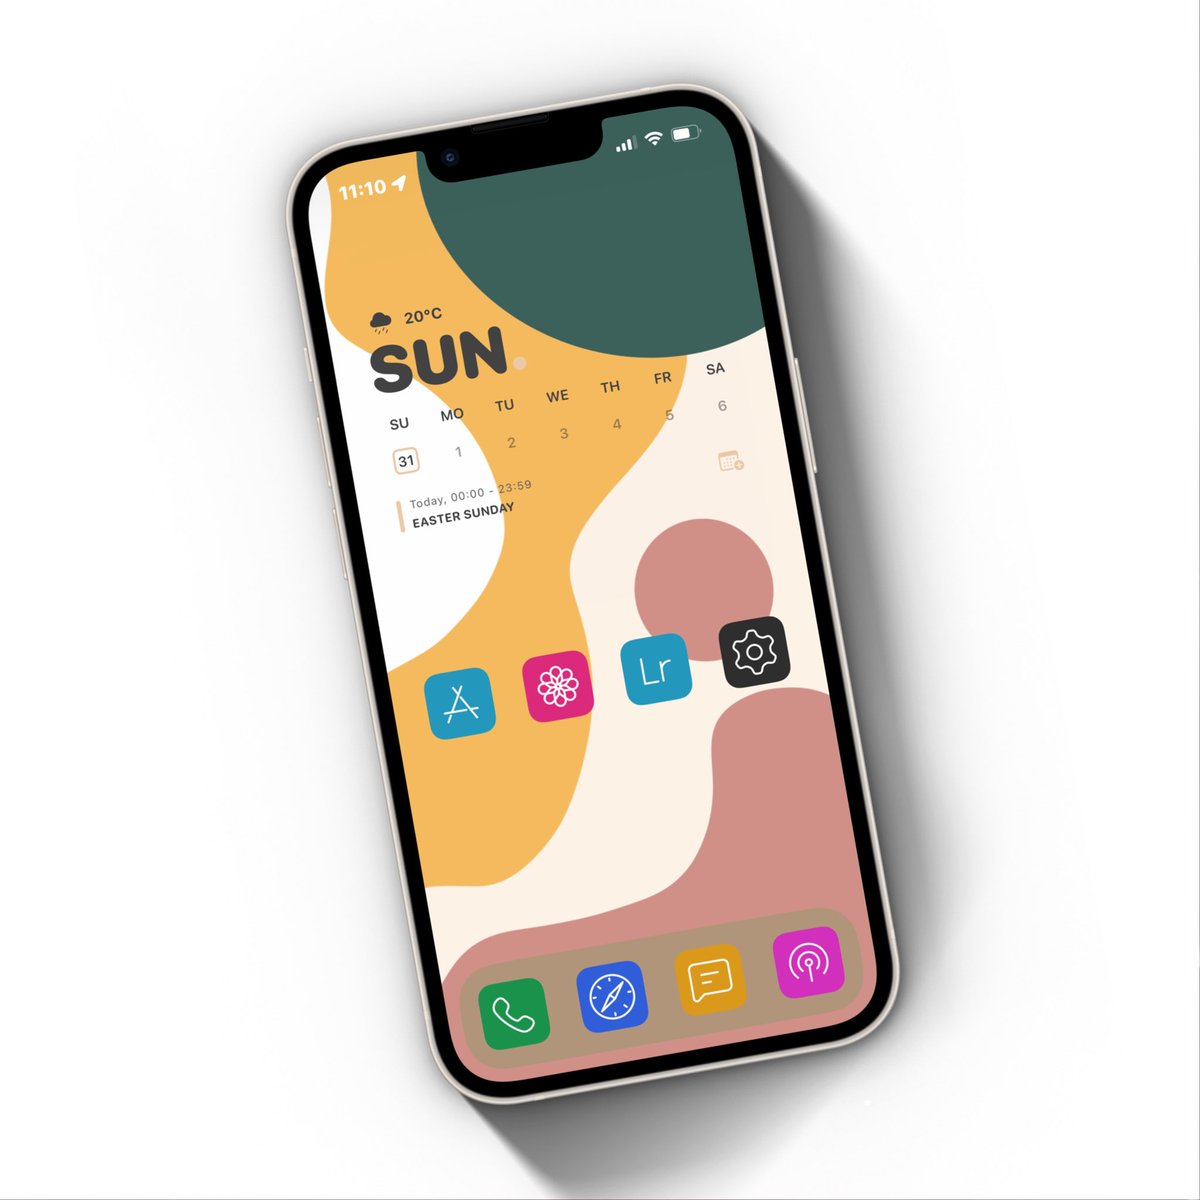 Sunday setup 
#widget by @Hewoood and available here gumroad.com/a/1039954899/i…
#icons by @kushaljain94 
#wallpaper by @Canoopsy 
#mockup by @screenshot_pro 
#iOS17 #Apple #iPhone #iossetups #ioshomescreen